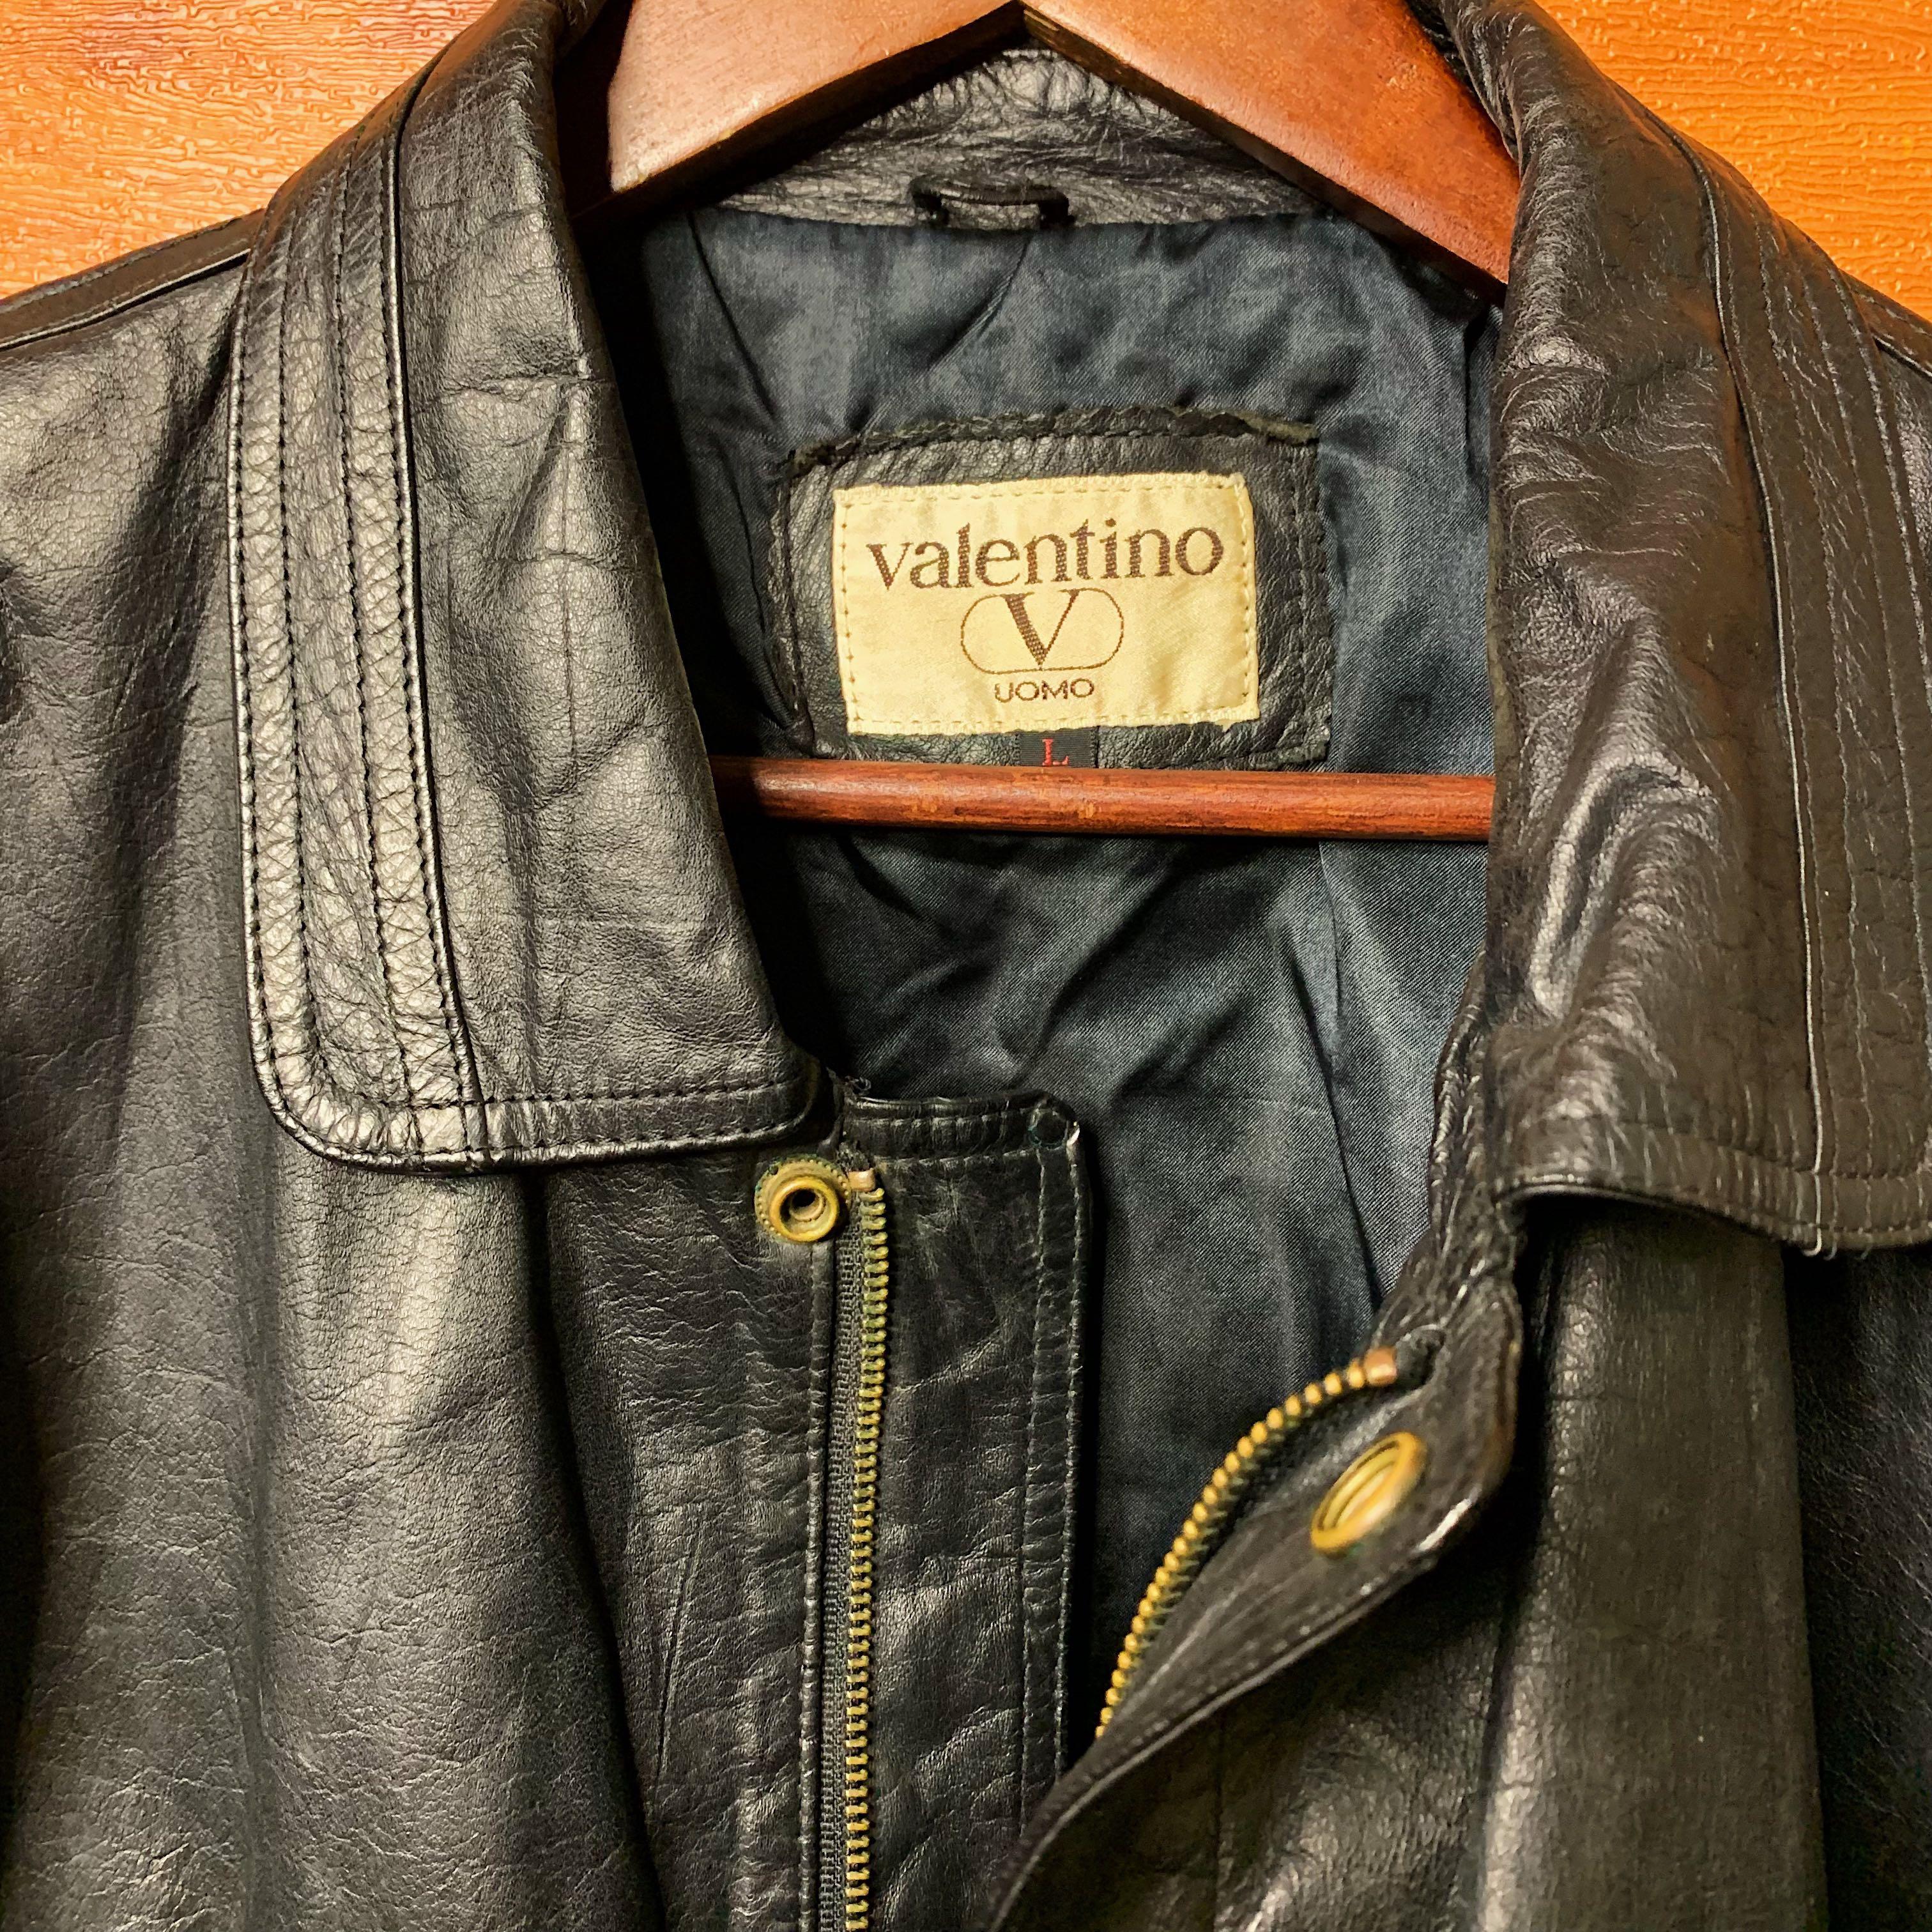 Valentino Leather Jacket, Men's Fashion, Coats, Jackets and Outerwear ...